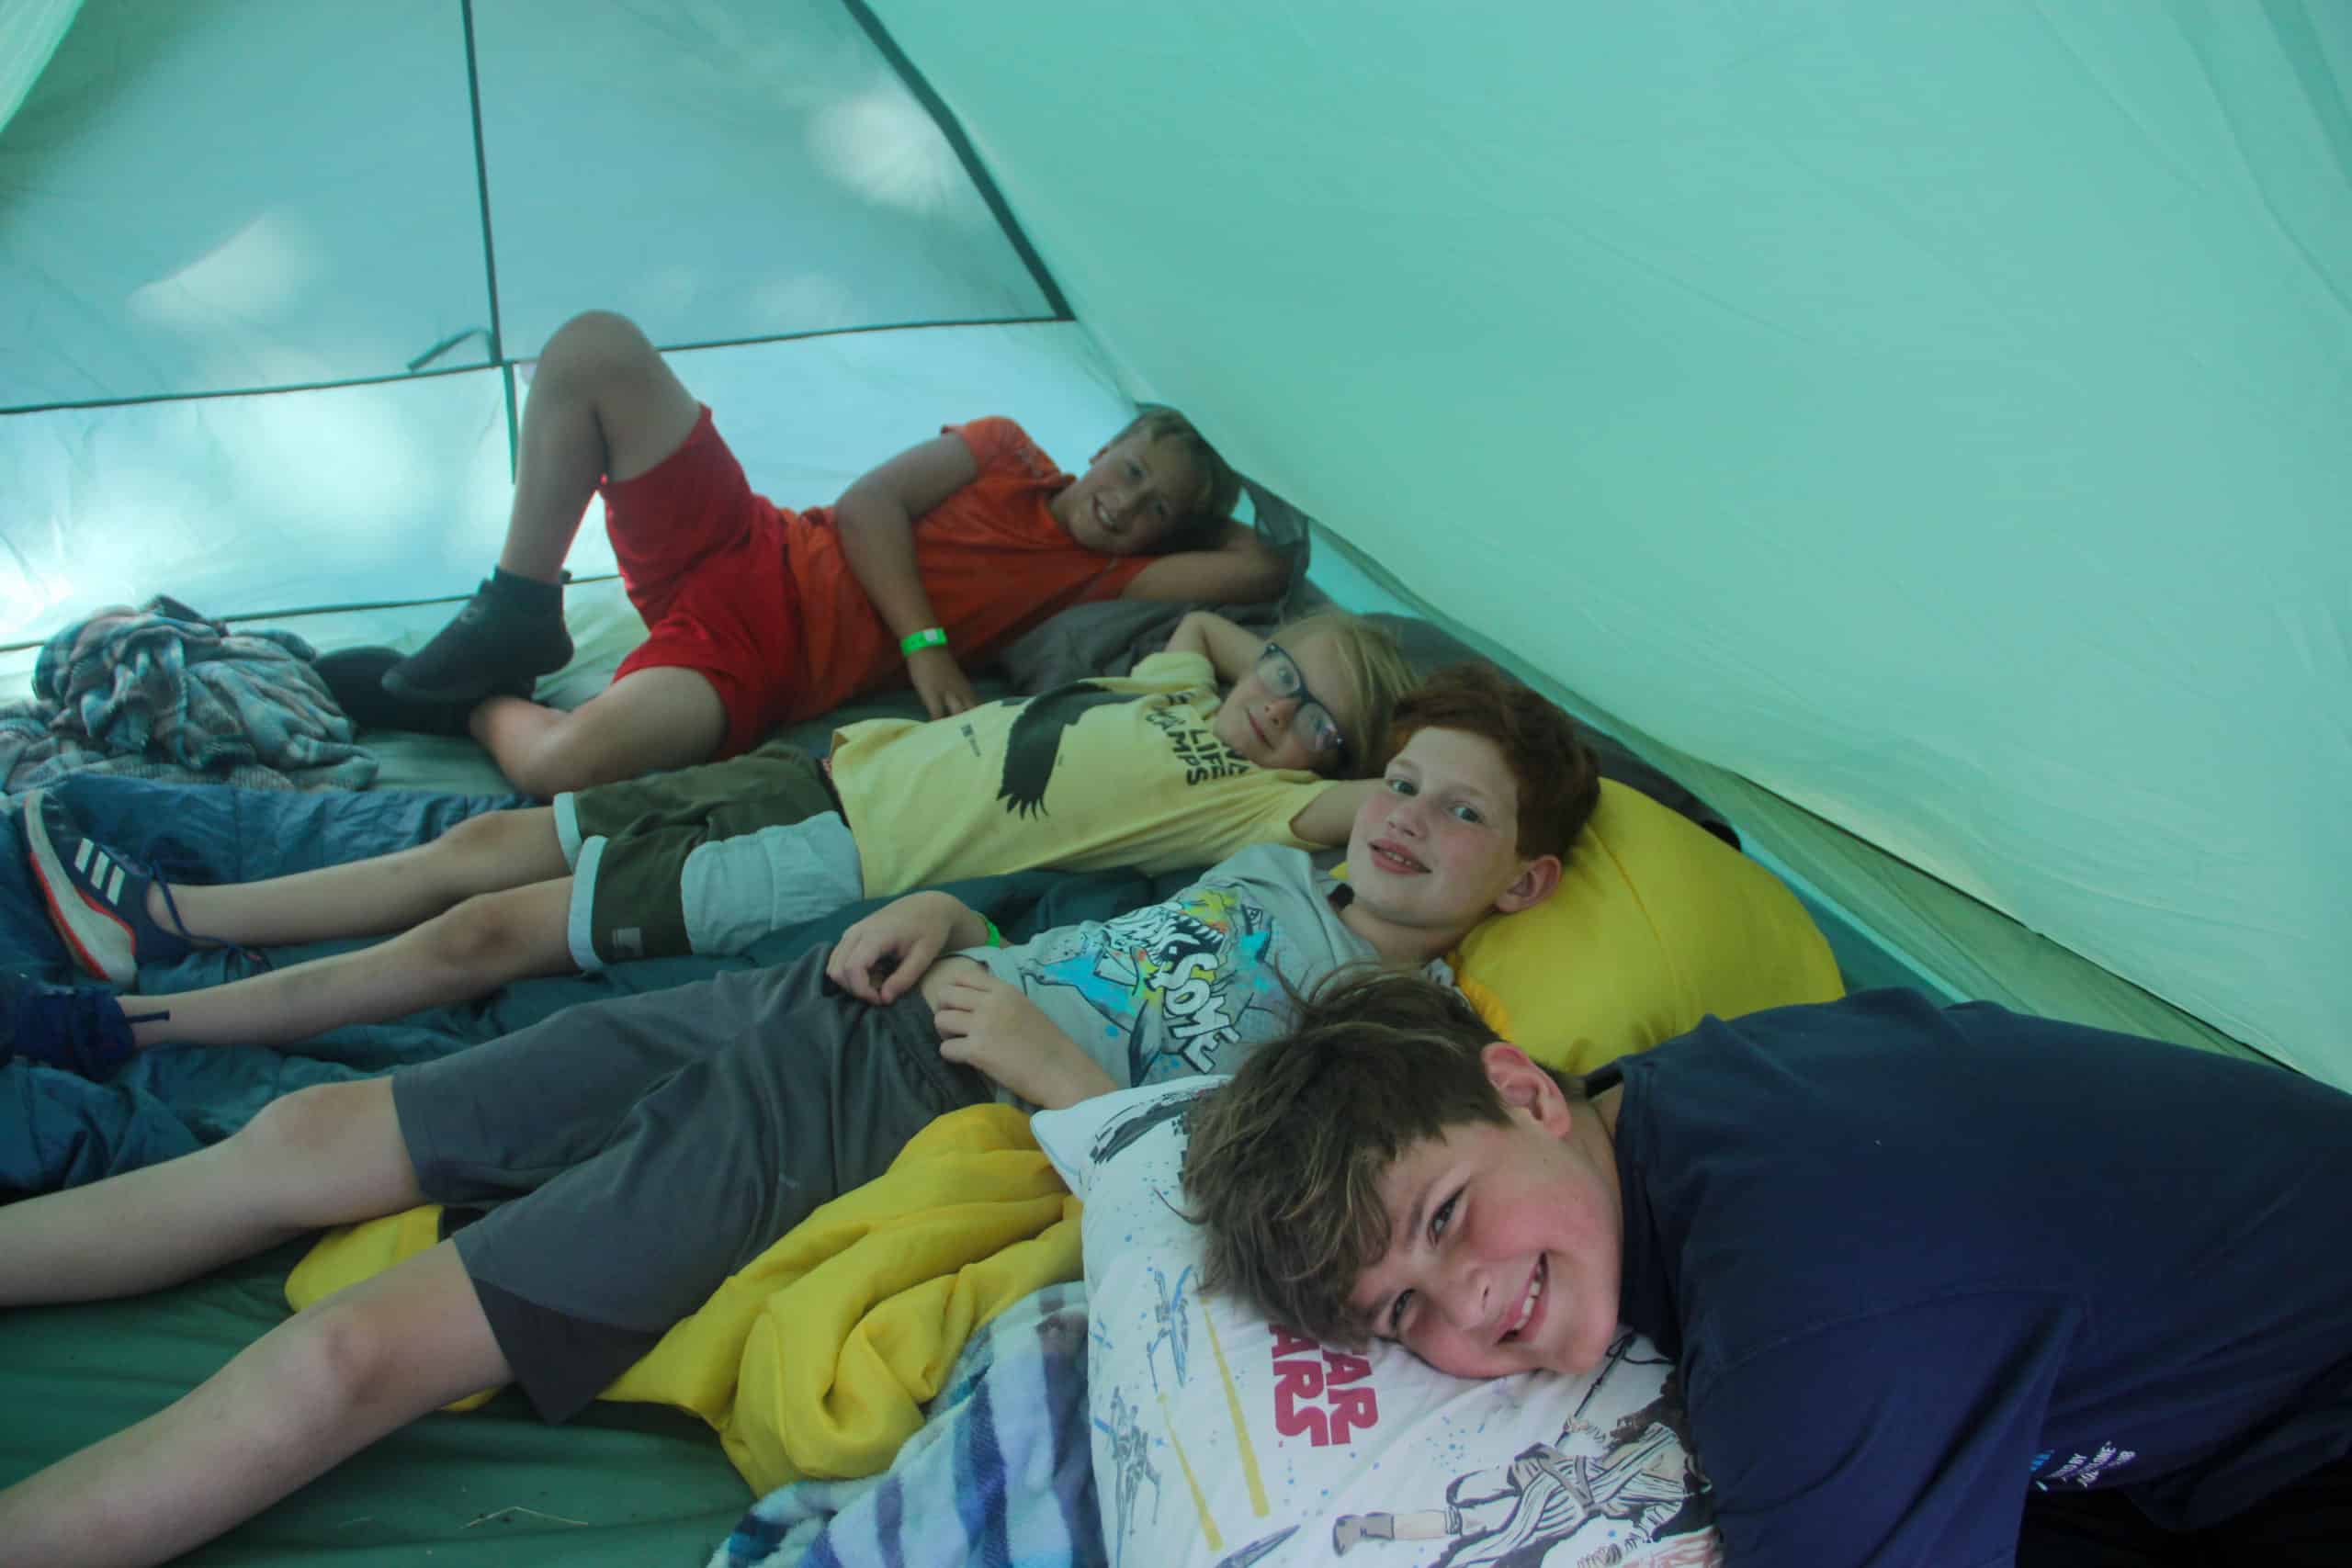 Four young boys laying on sleeping bags side by side in their tent.